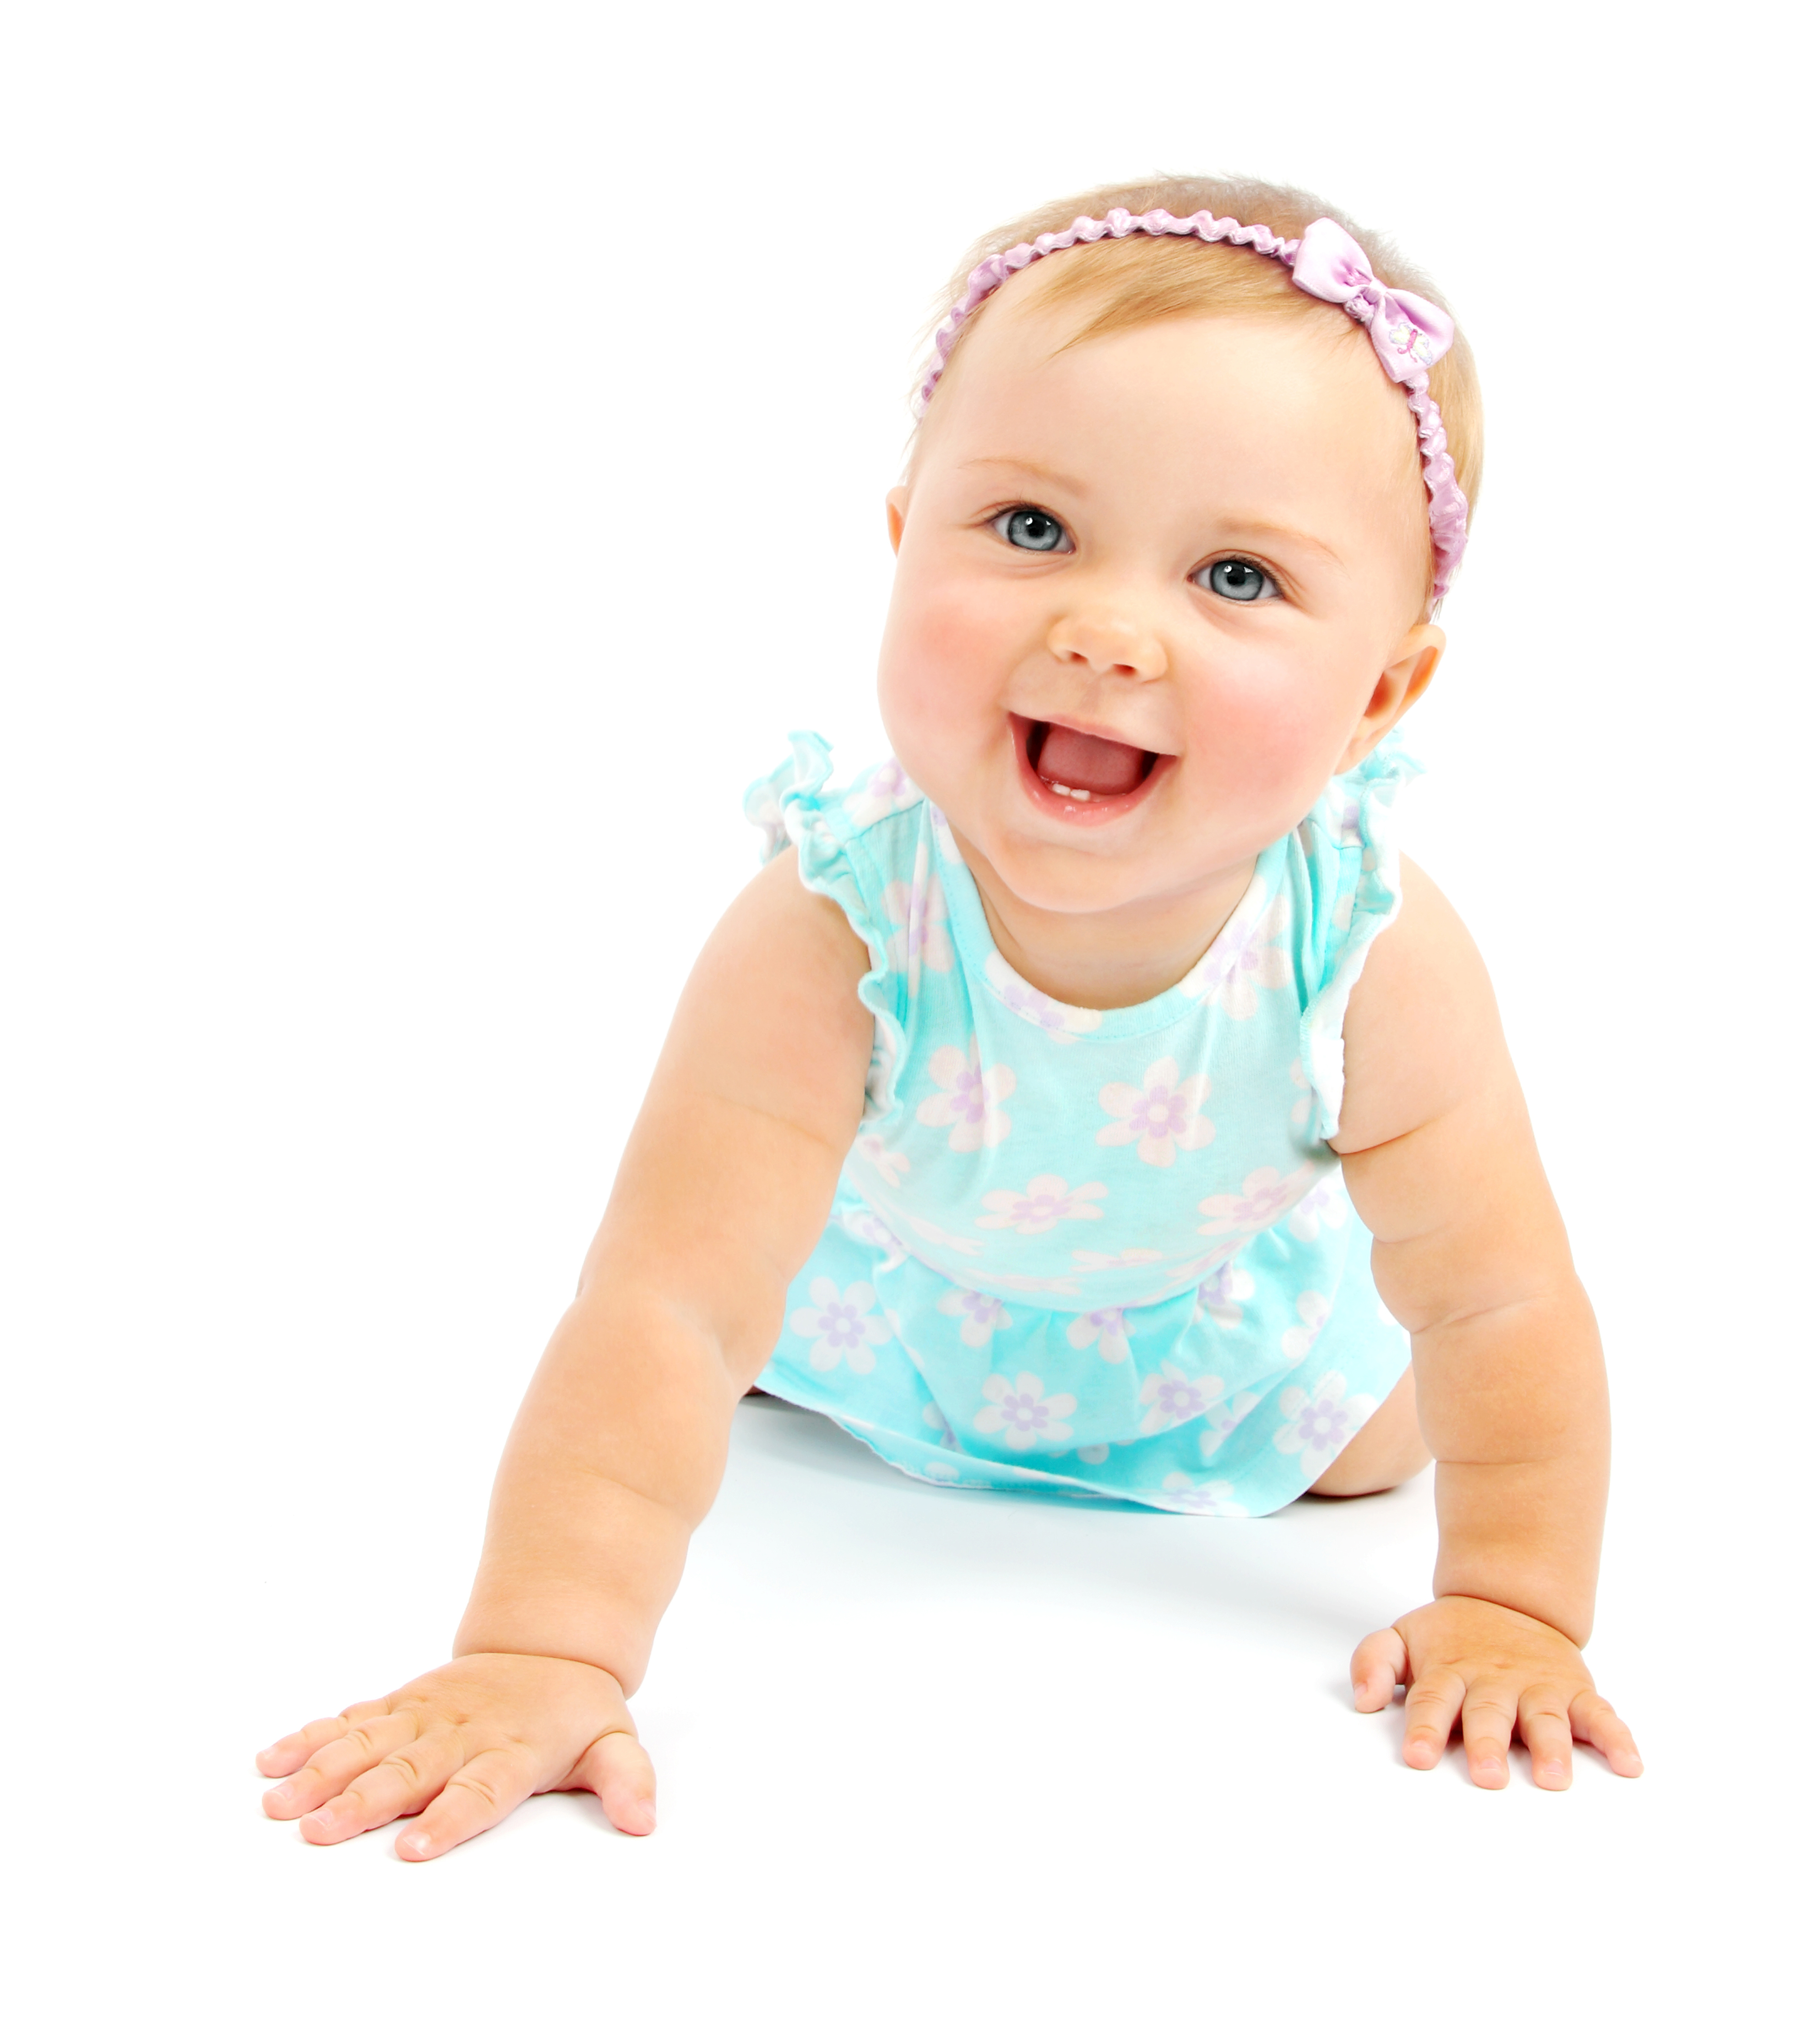 Image of baby smiling.